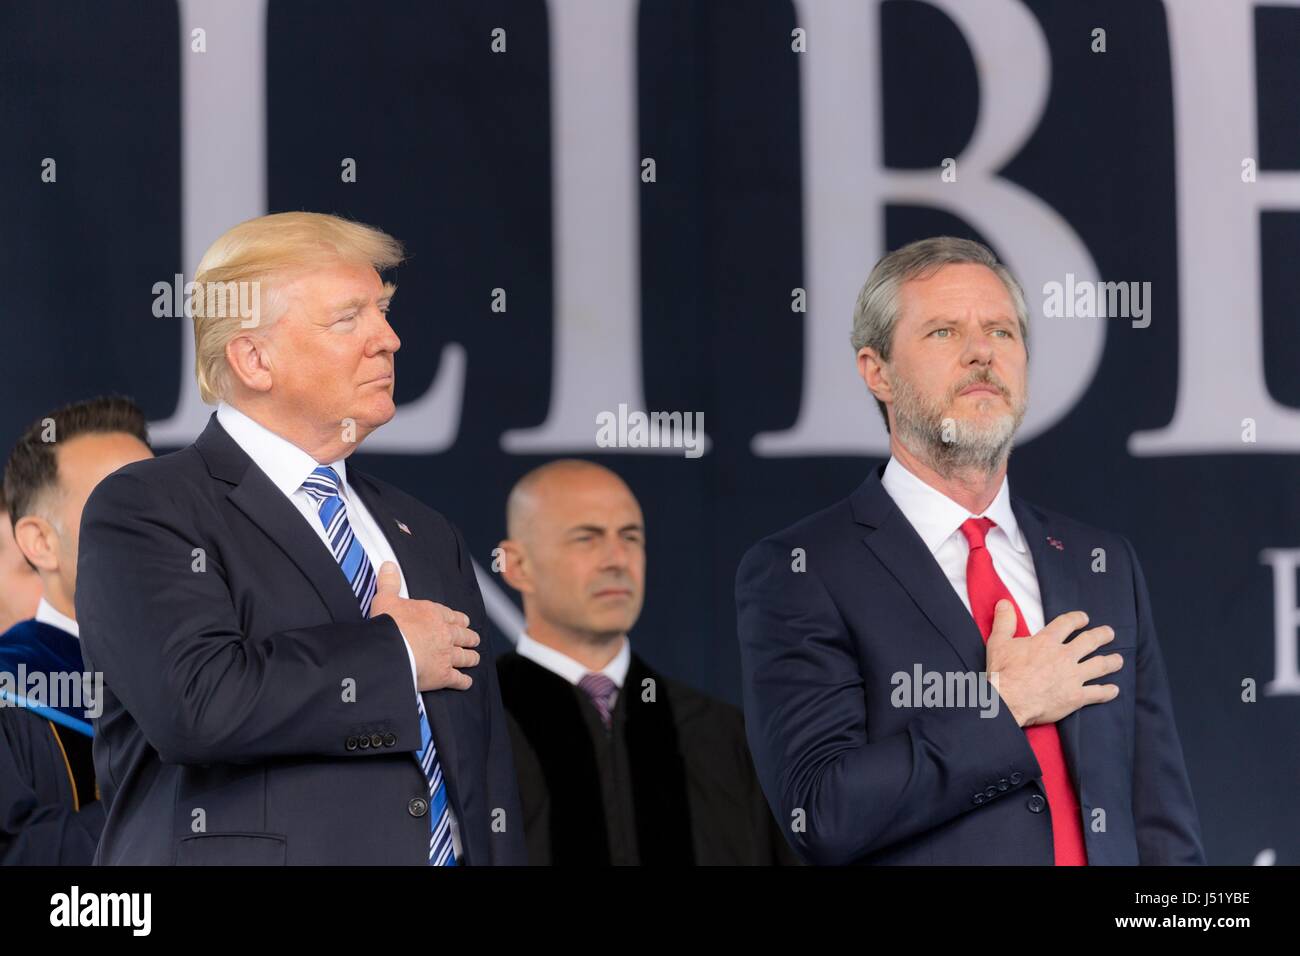 U.S. President Donald Trump stands for the national anthem alongside Liberty University President Jerry Falwell Jr., right, during the graduating class commencement ceremony May 13, 2017 in Lynchburg, Virginia. Stock Photo